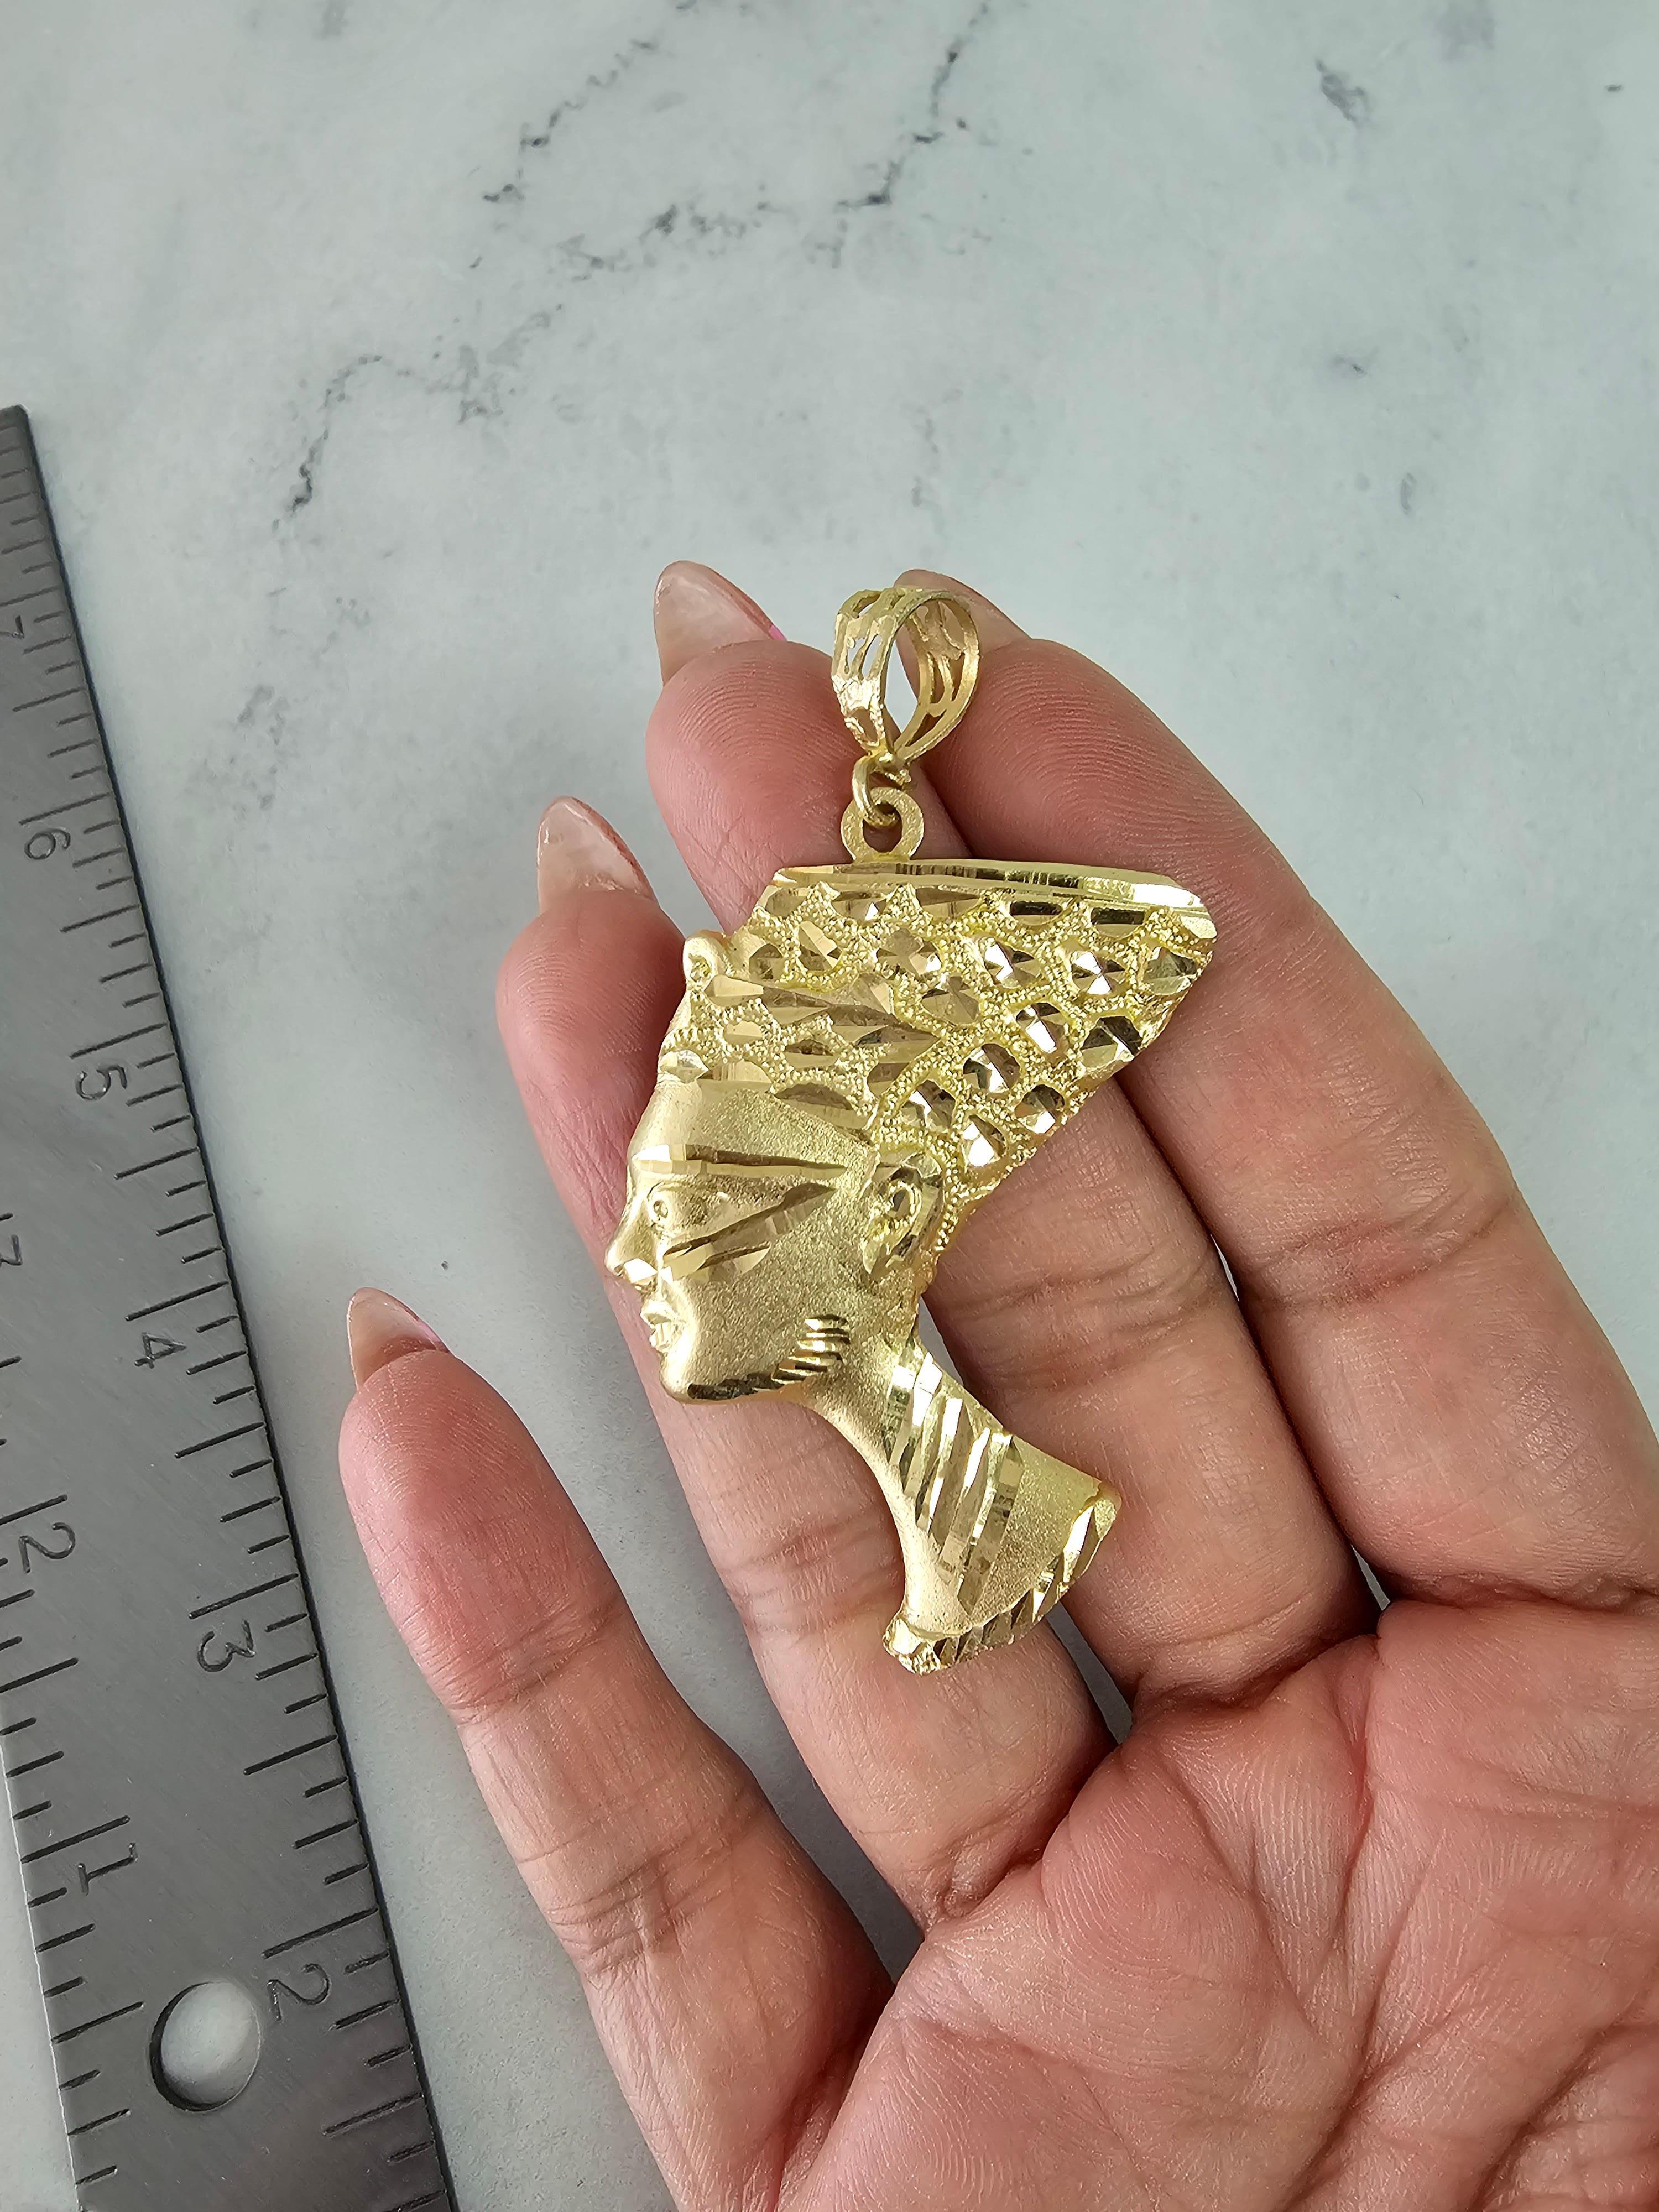 ♥ Product Summary ♥

Metal: 10K Yellow Gold
Dimensions: 60mm x 45mm
Weight: 7 grams